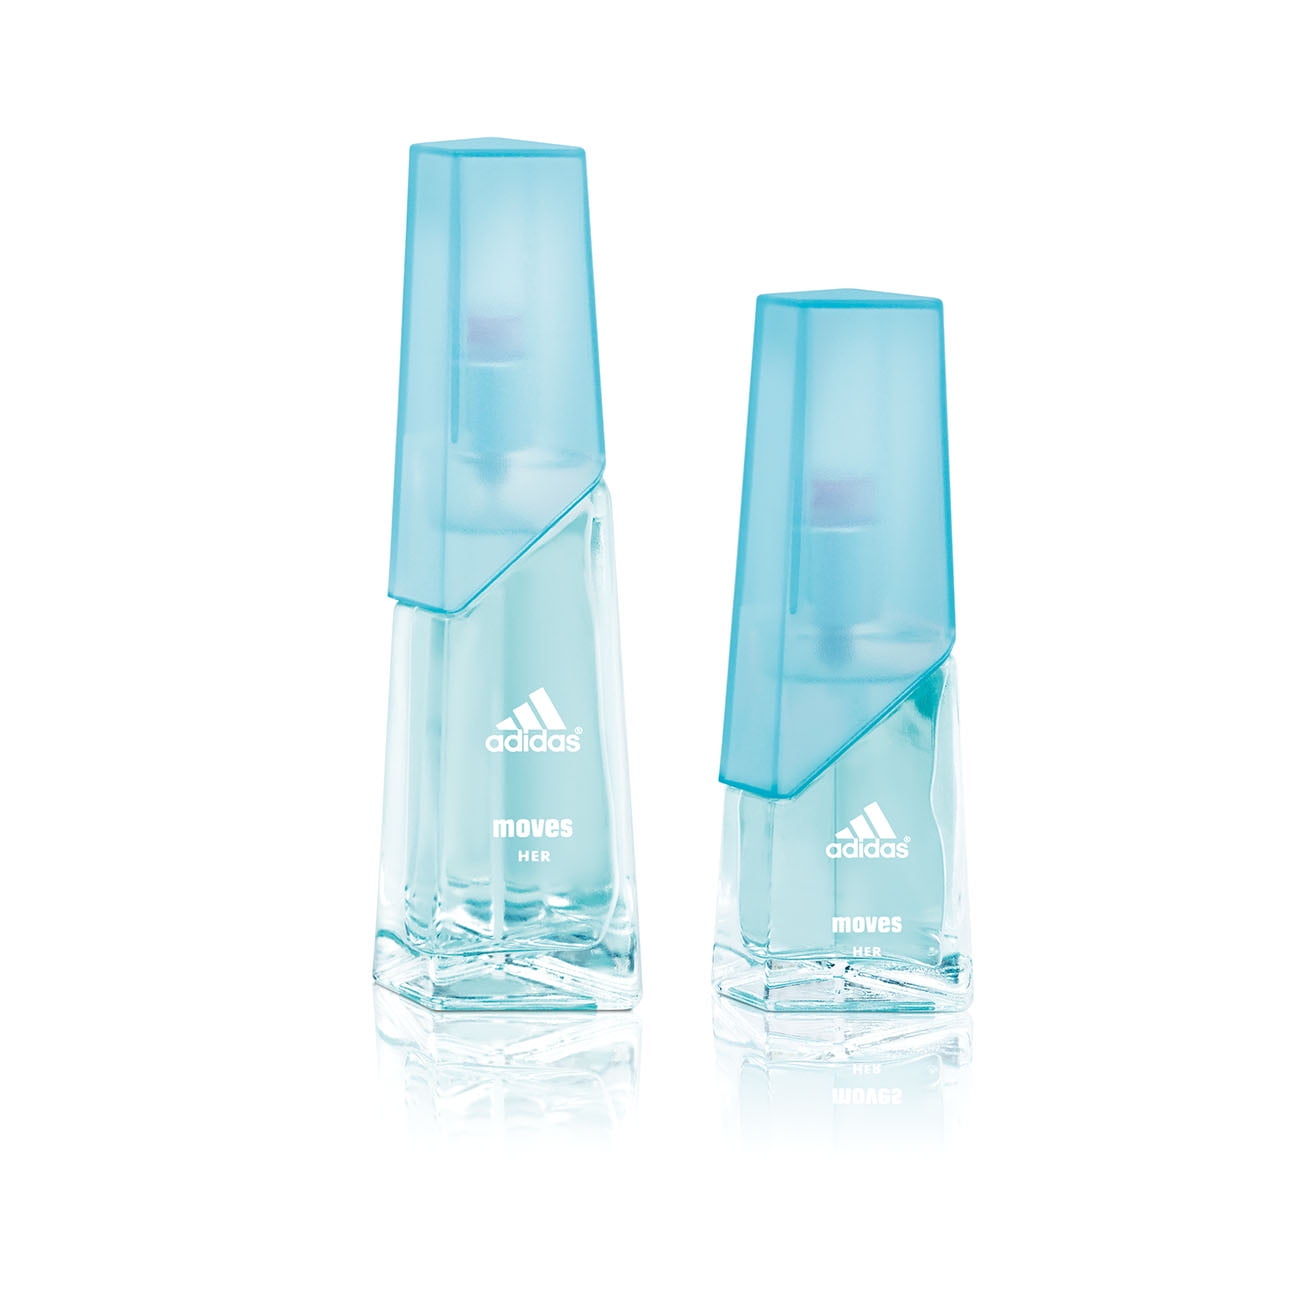 Adidas Moves for Her by Adidas, Eau de 